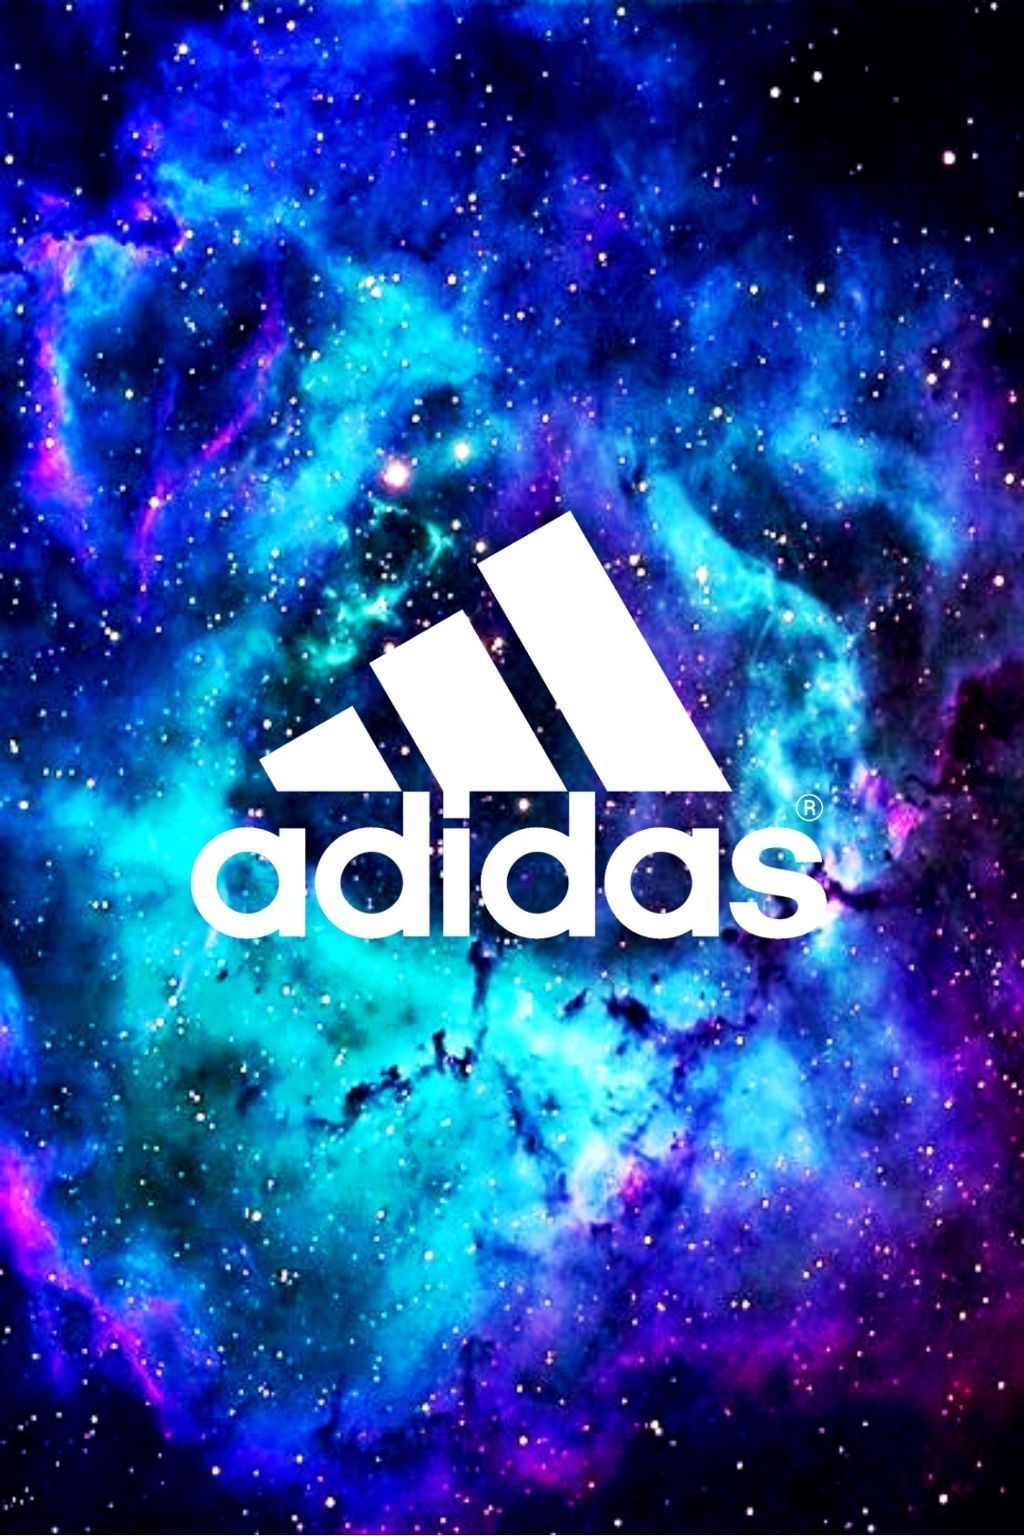 Cool Adidas Wallpapers - Wallpaper Cave